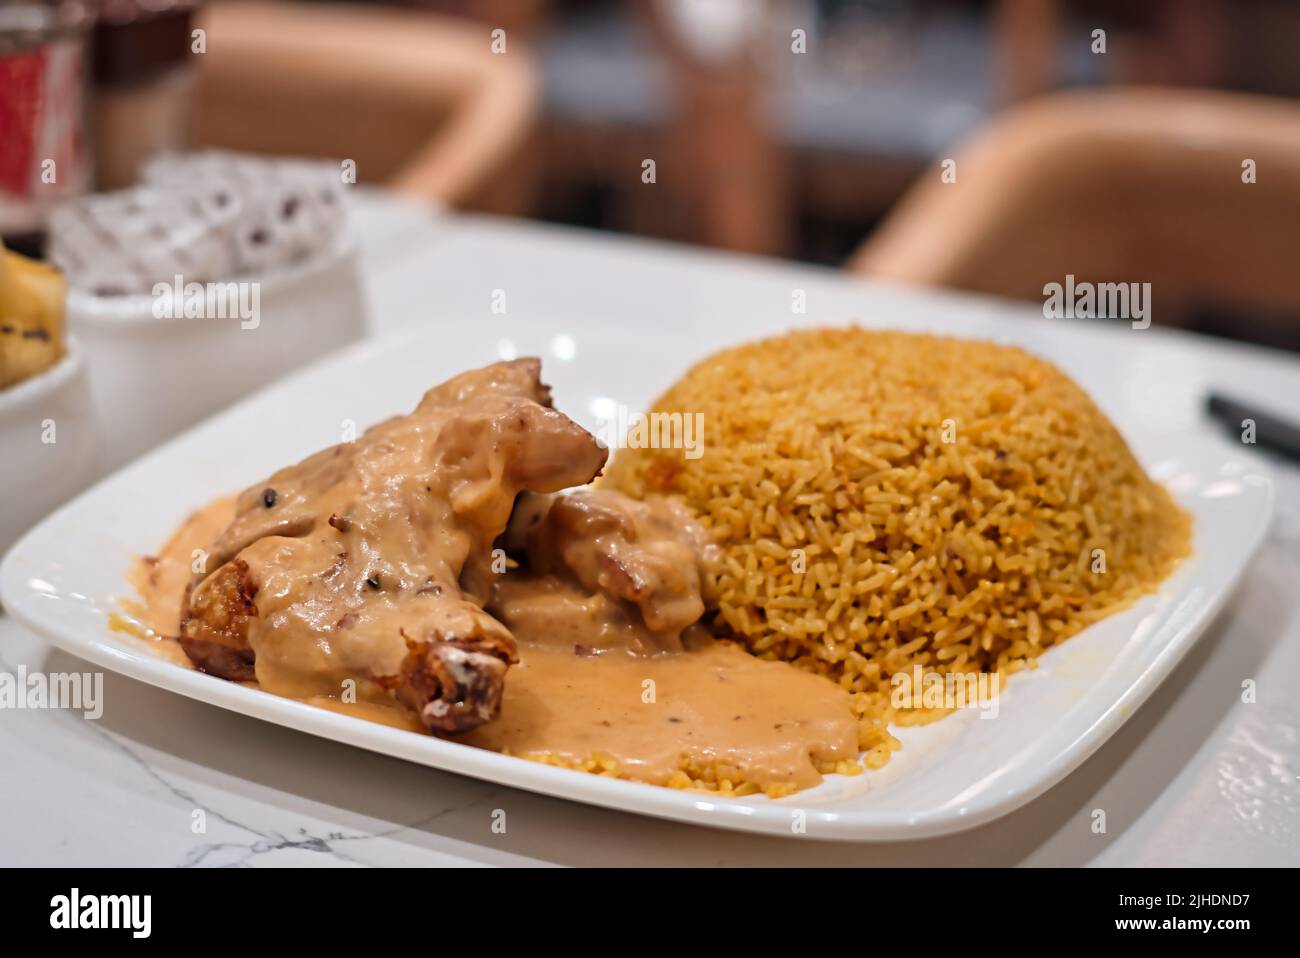 A shallow focus of a delicious chicken leg with some rice in a restaurant Stock Photo